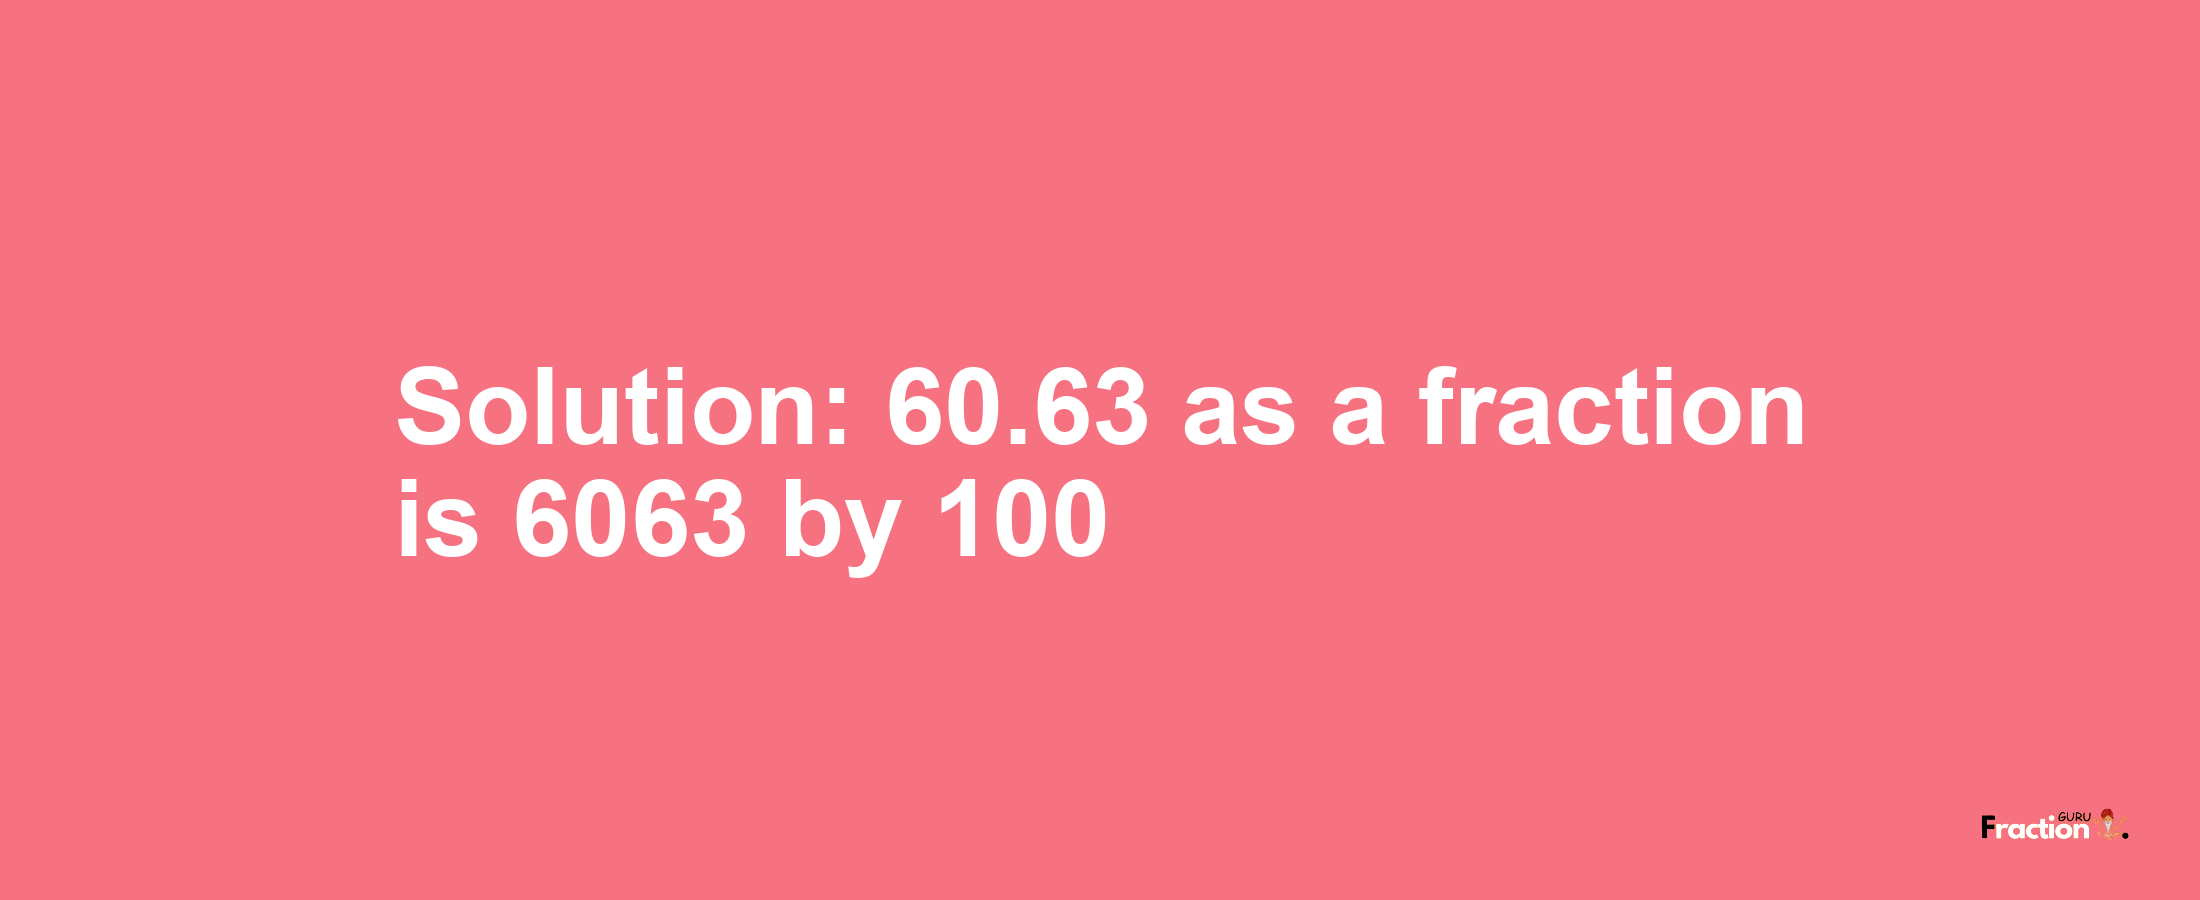 Solution:60.63 as a fraction is 6063/100